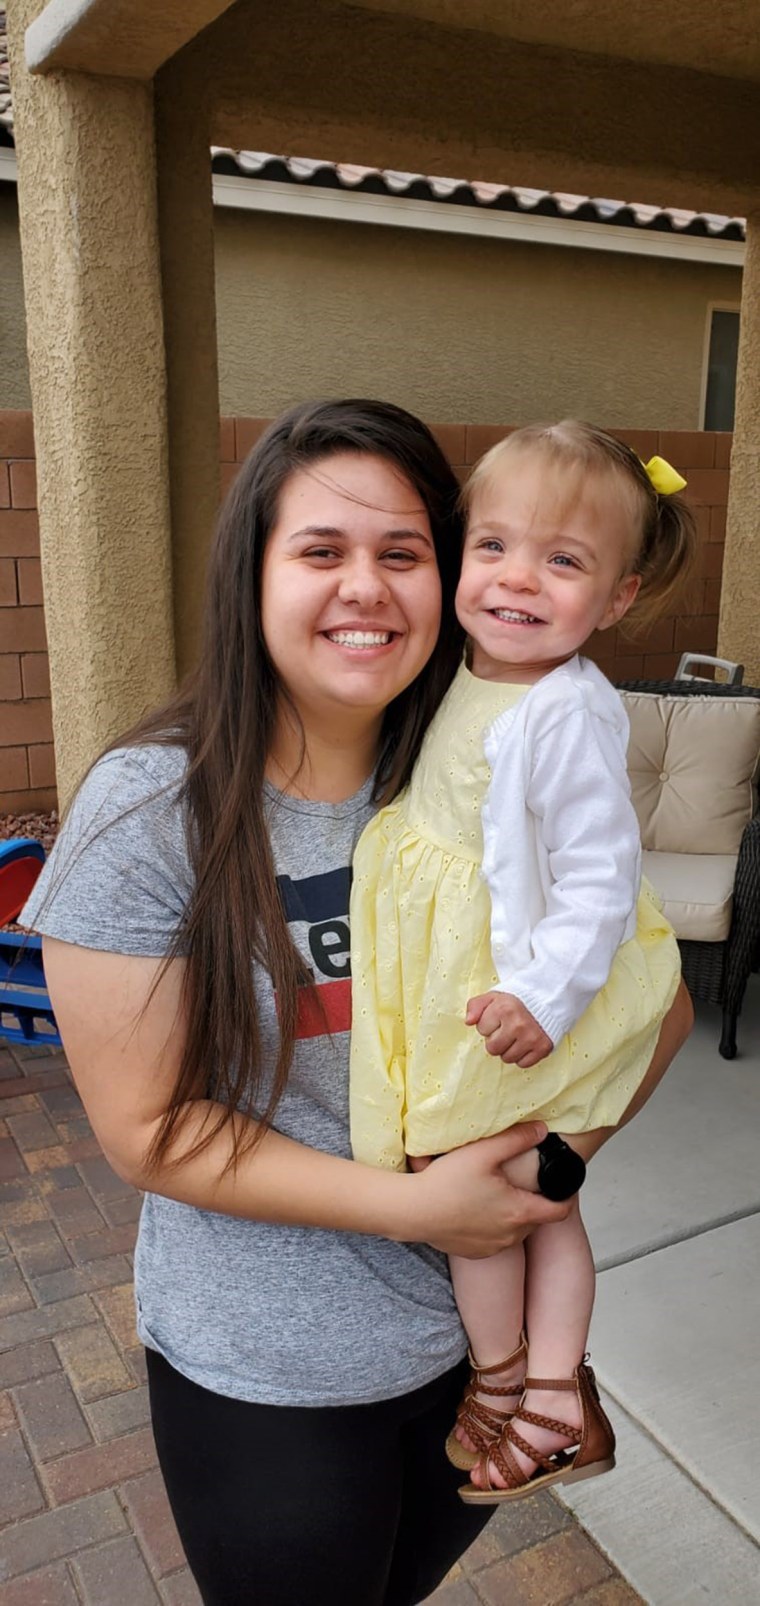 Angela Babb's daughter, Vanessa, 2, is cared for by Giovana Garcia, an au pair from Brazil.